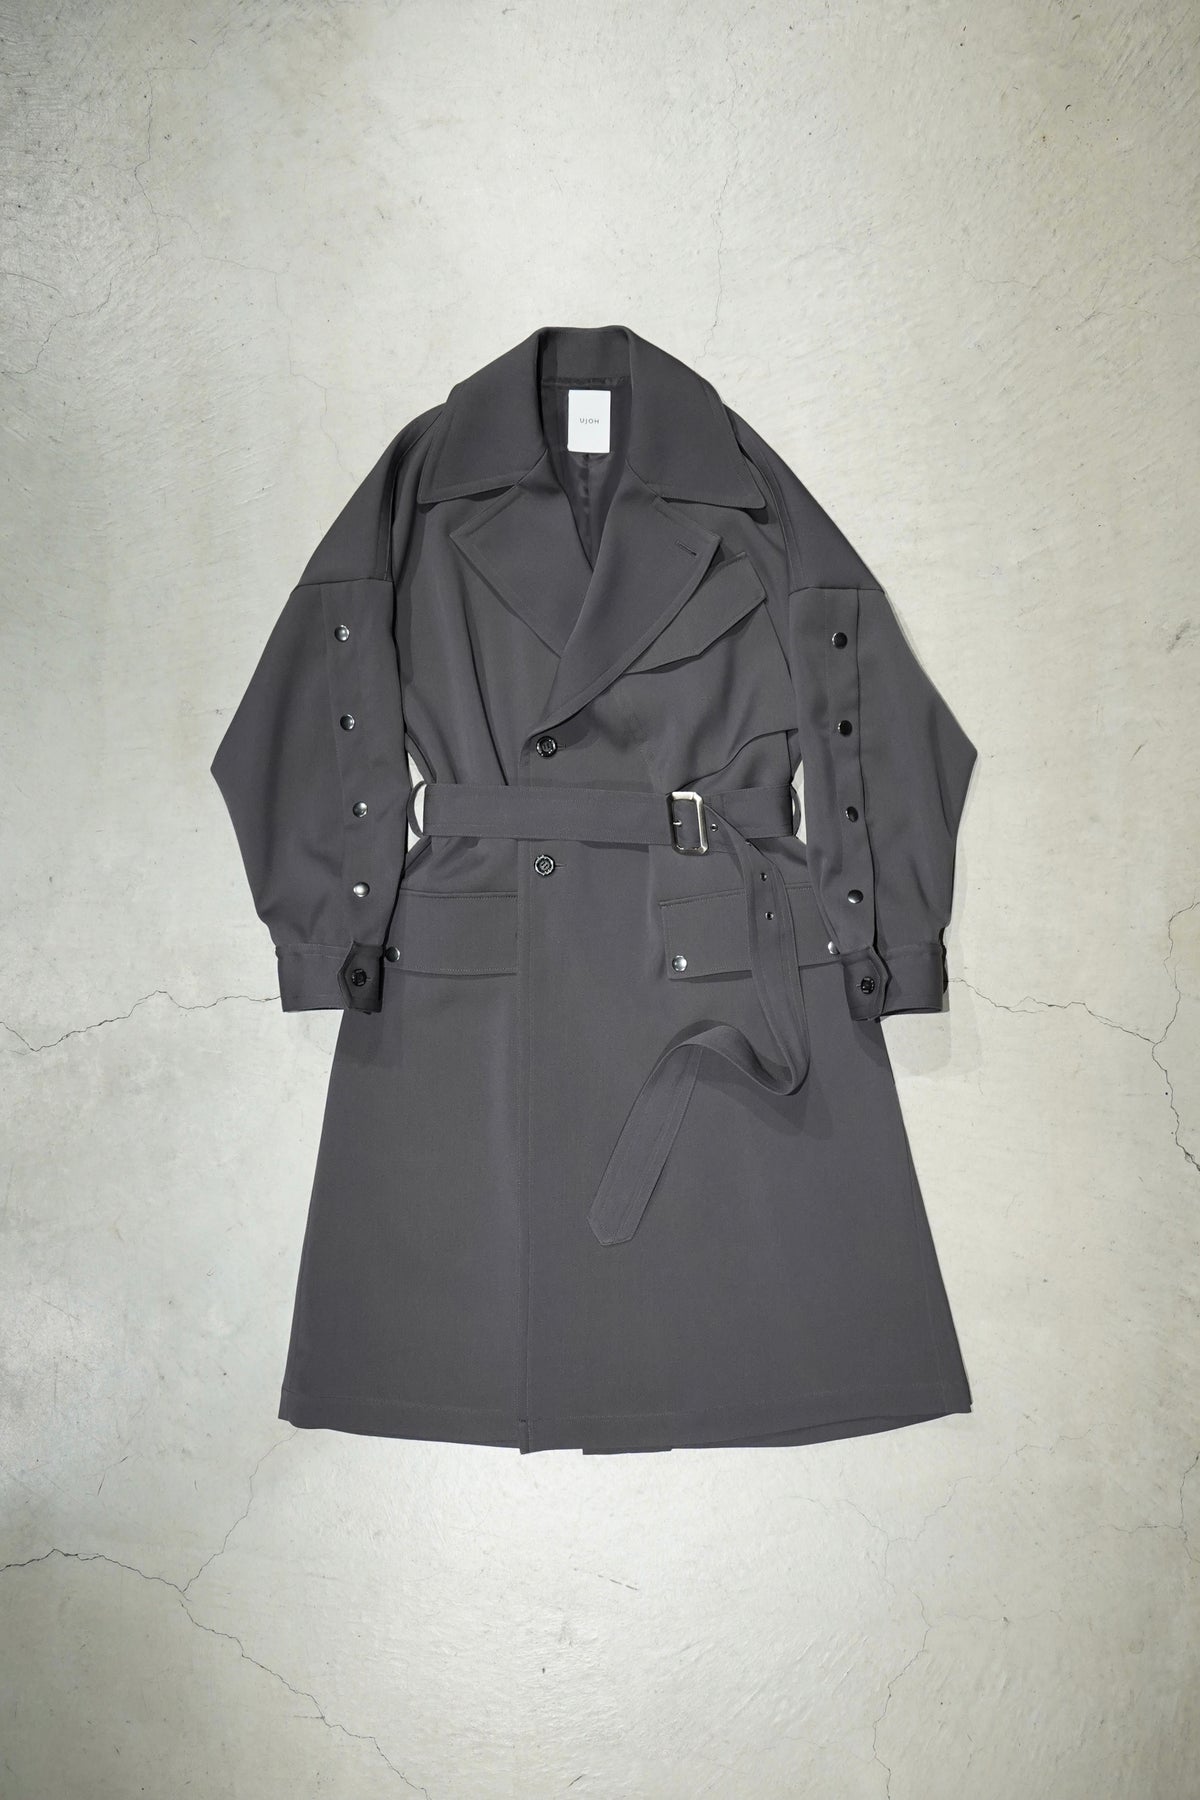 UJOH's Motorcycle COAT (Charcoal Gray) (Court) mail order